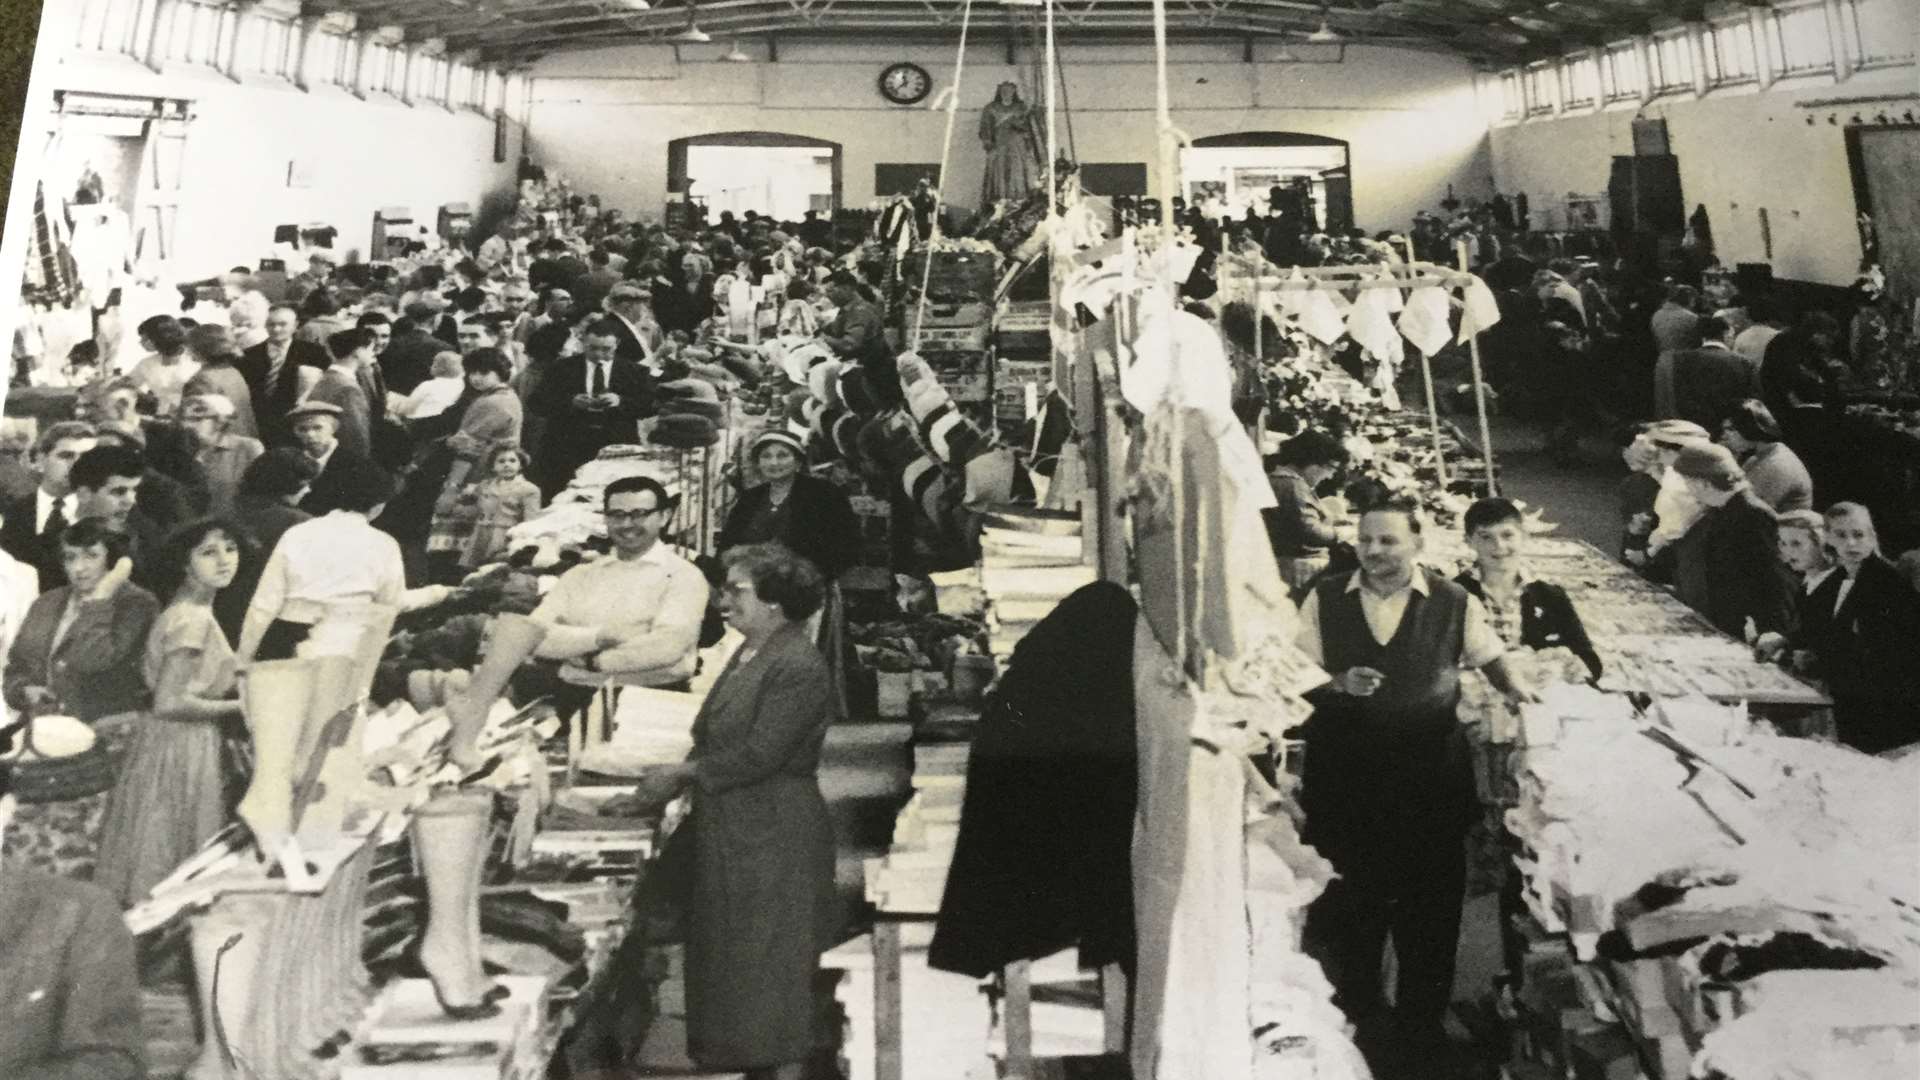 A view of the bustling market in the 1950s